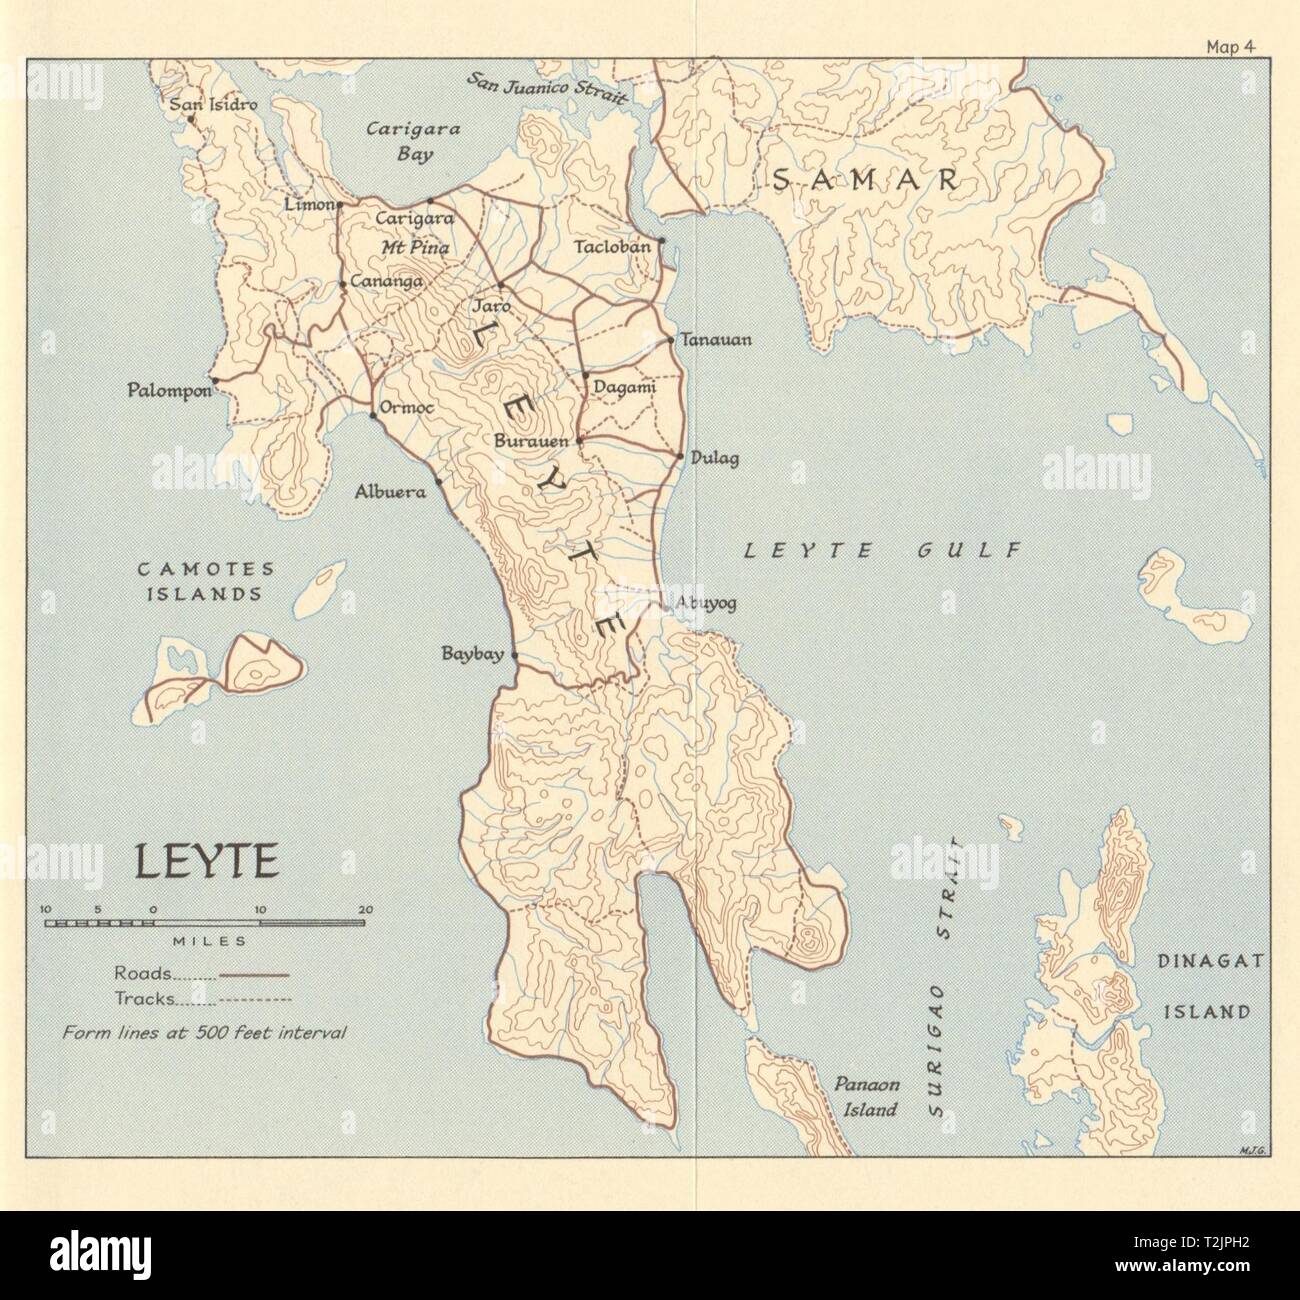 Leyte Battle Of Leyte Gulf October 1944 Philippines World War Two 1965 Map T2JPH2 